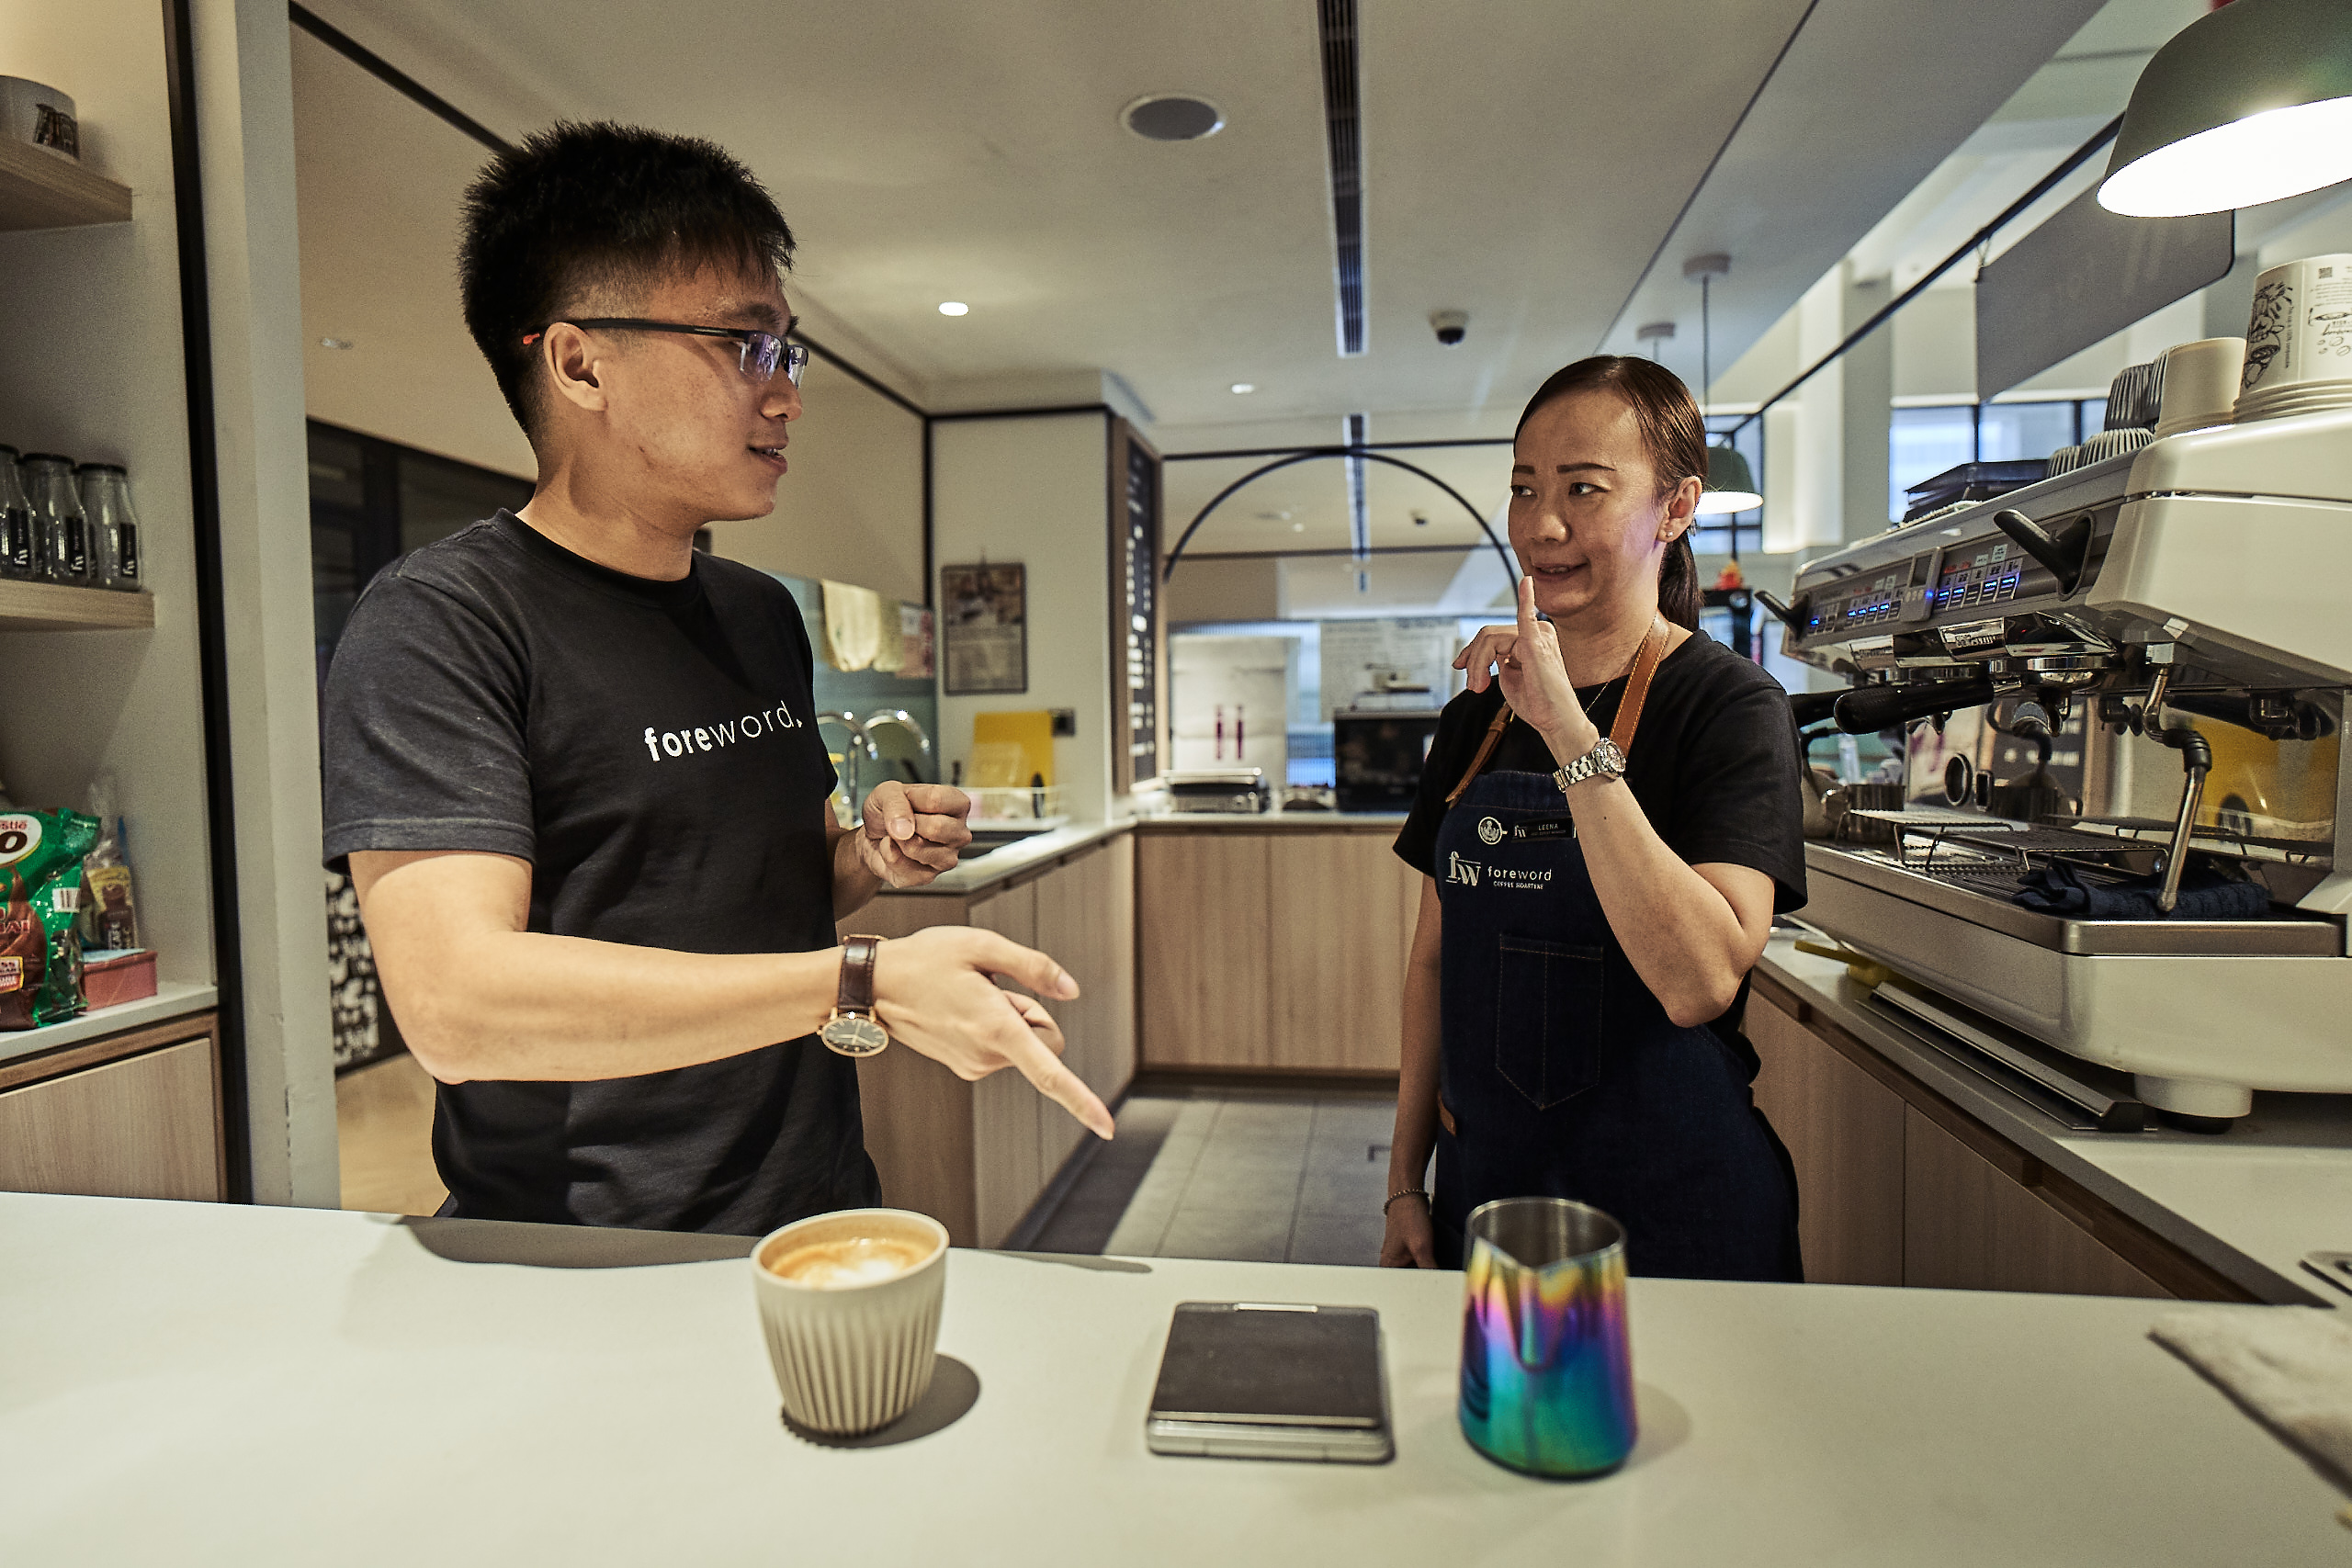 A woman communicating with a man using sign language. The man is pointing to a coffee cup on the table